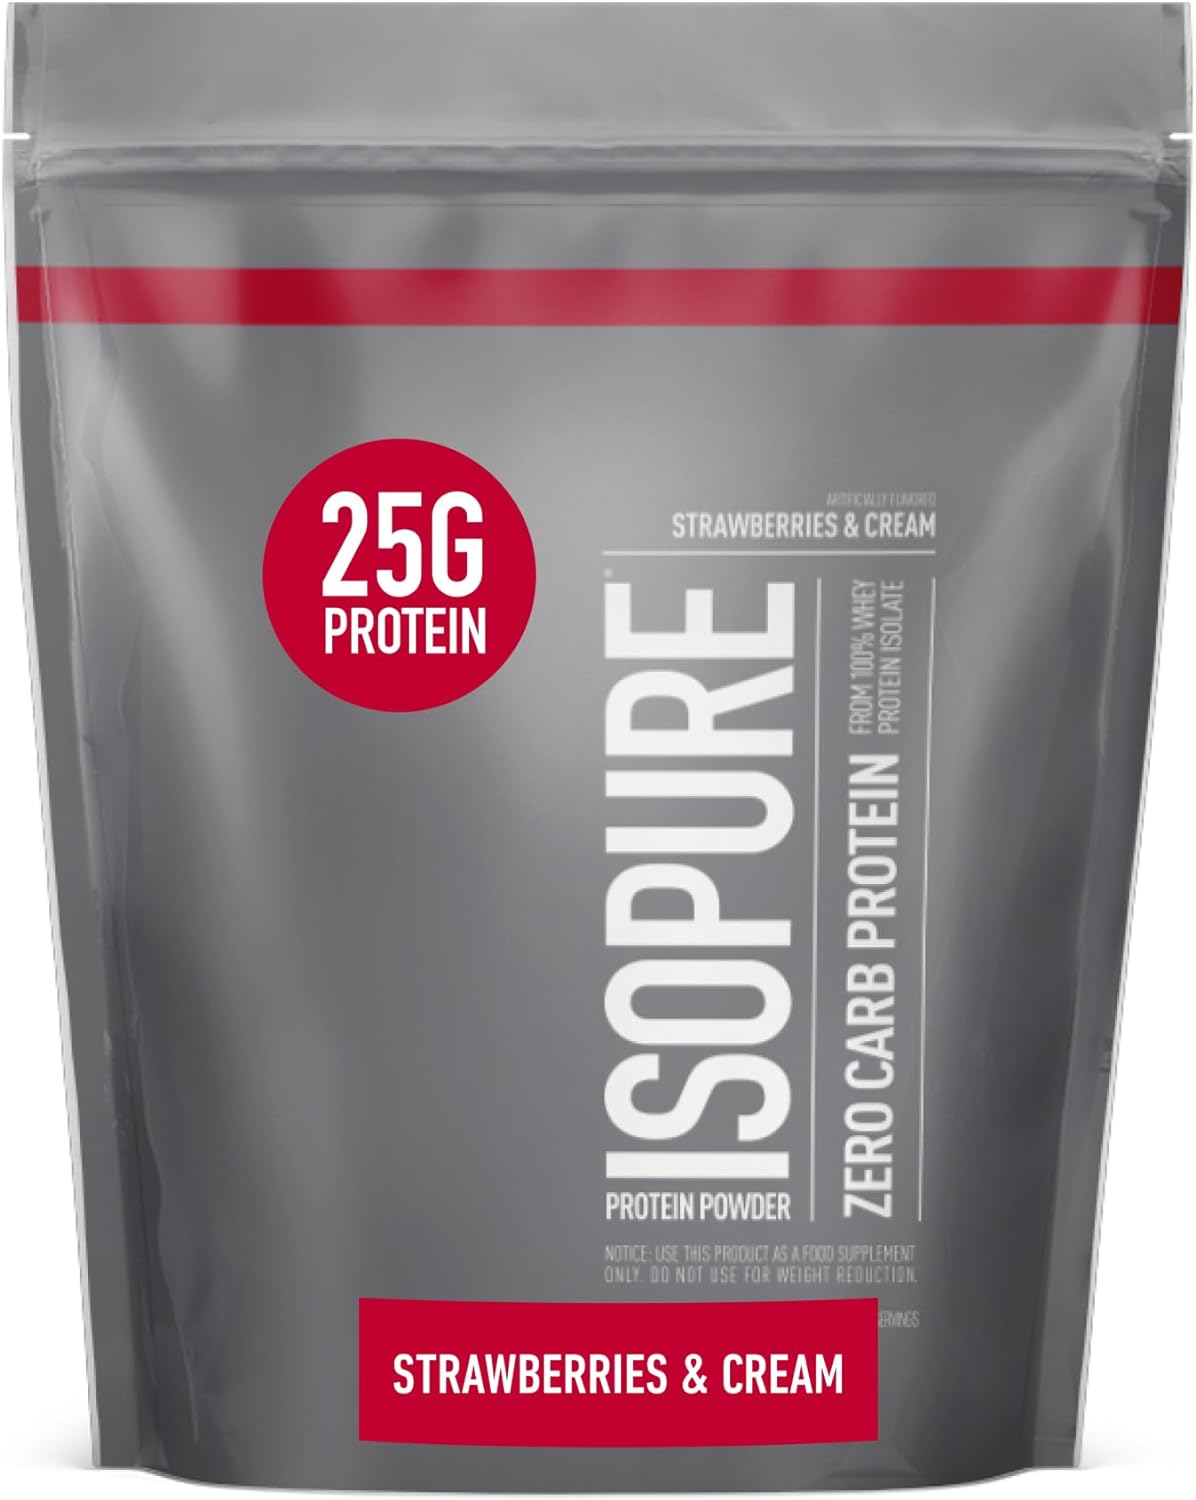 Isopure Protein Powder, Zero Carb Whey Isolate, Gluten Free, Lactose Free, 25g Protein, Keto Friendly, Strawberries & Cream, 15 Servings, 1 Pound (Packaging May Vary)